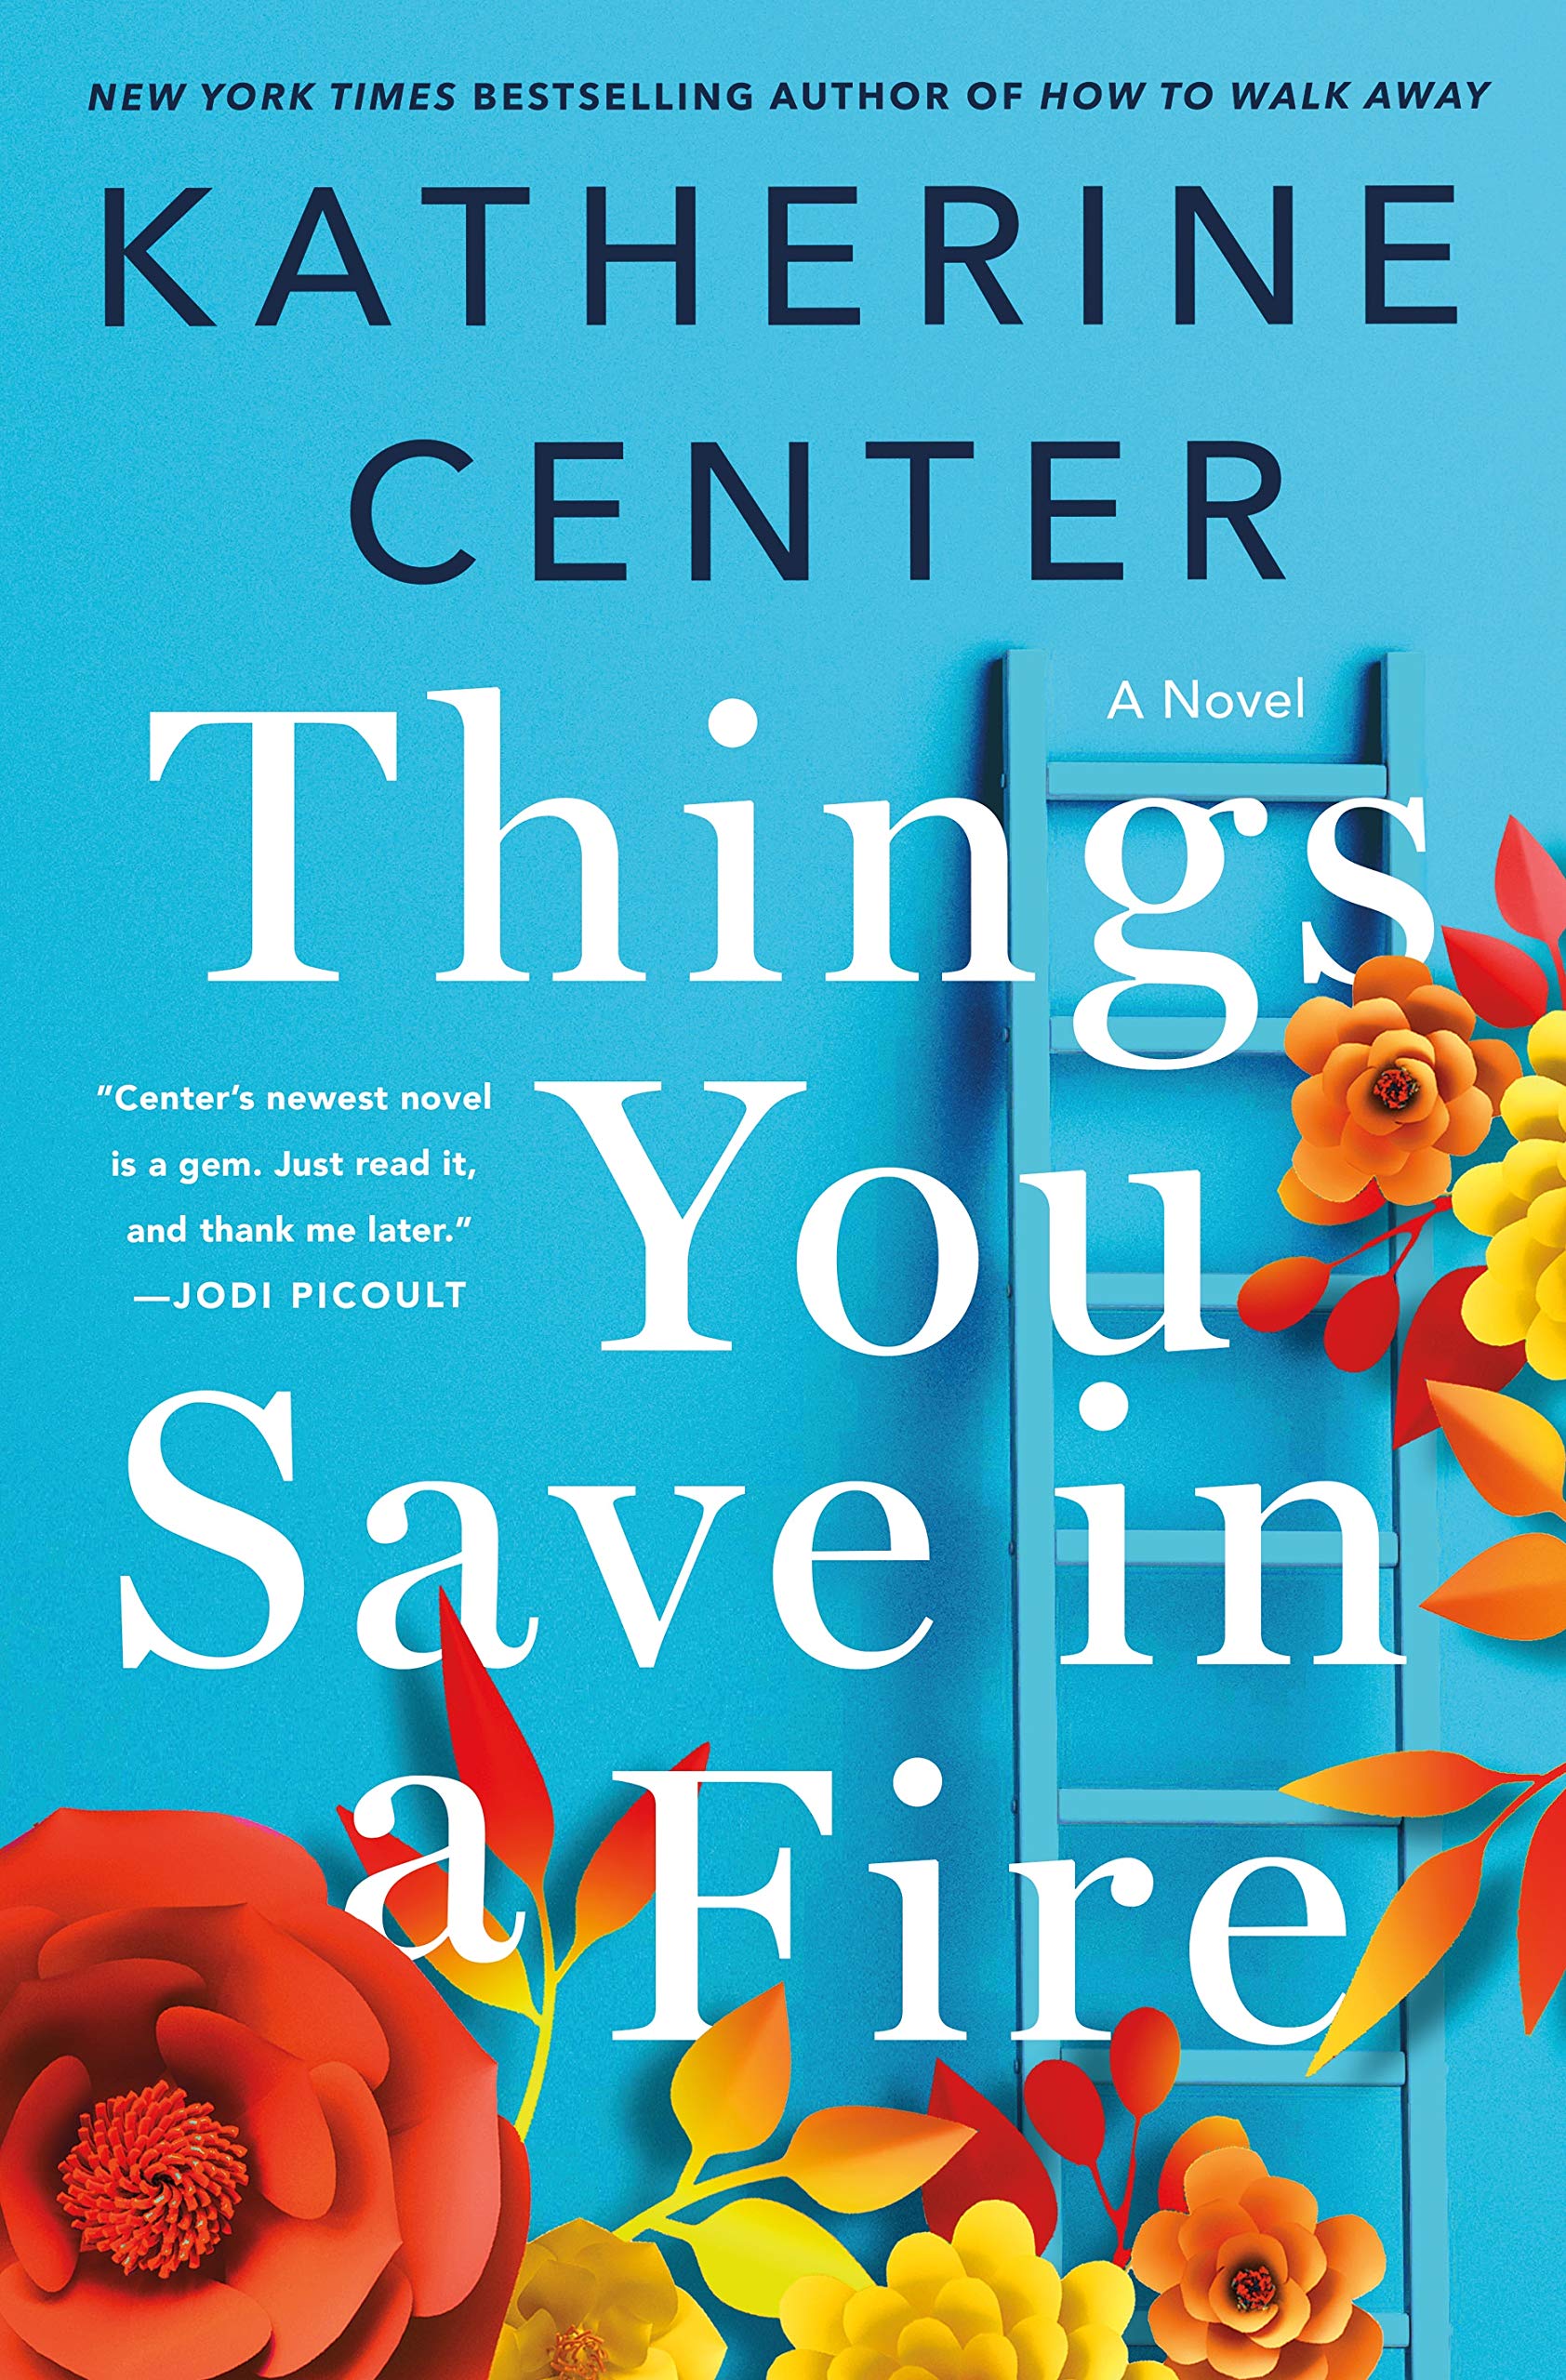 Things You Save in a Fire Novel Release Date (Hardcover; August 2019)